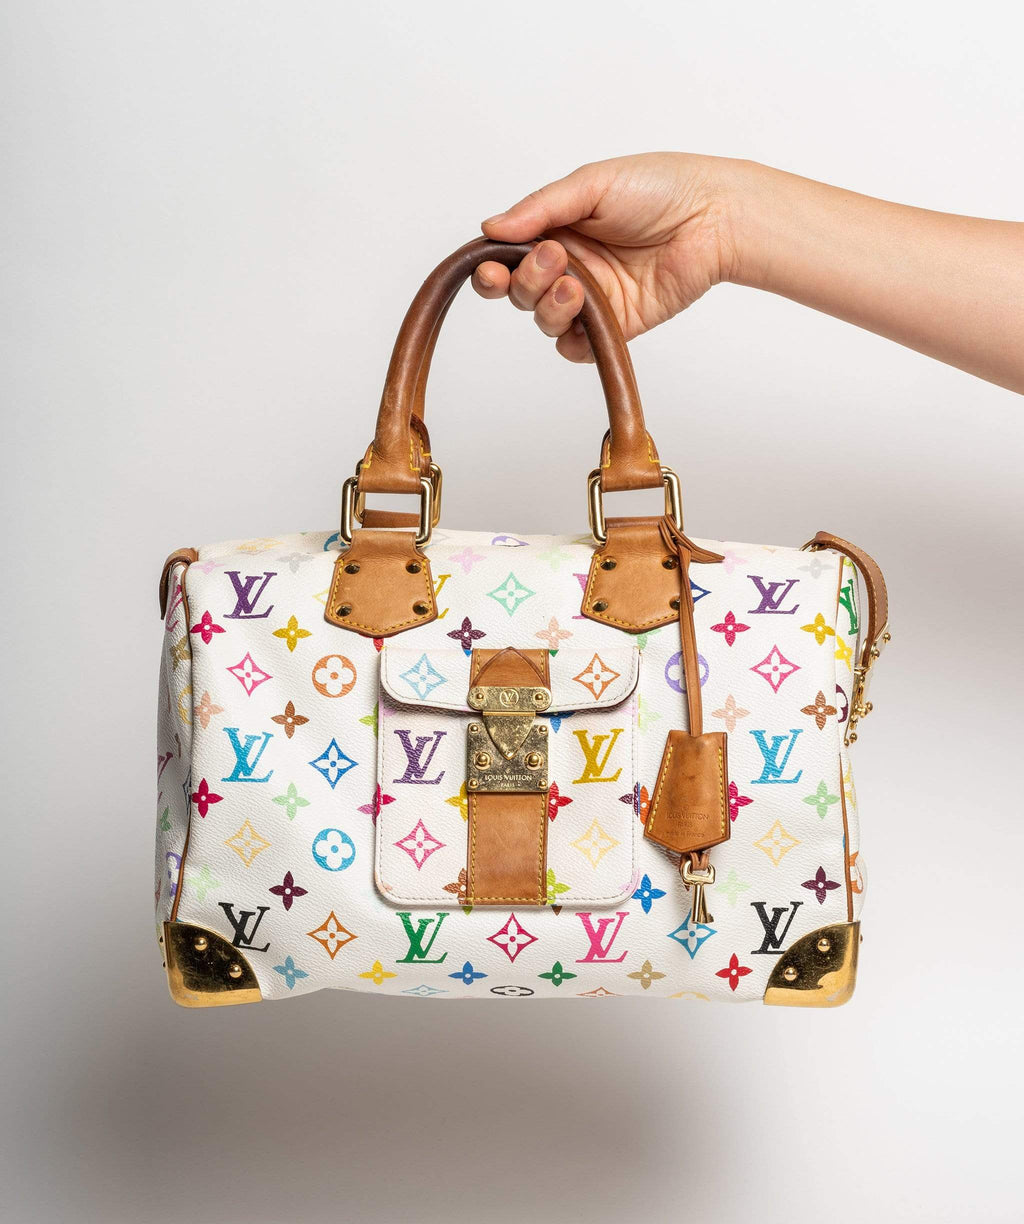 Classic handbags with color stickers - We are loving Louis